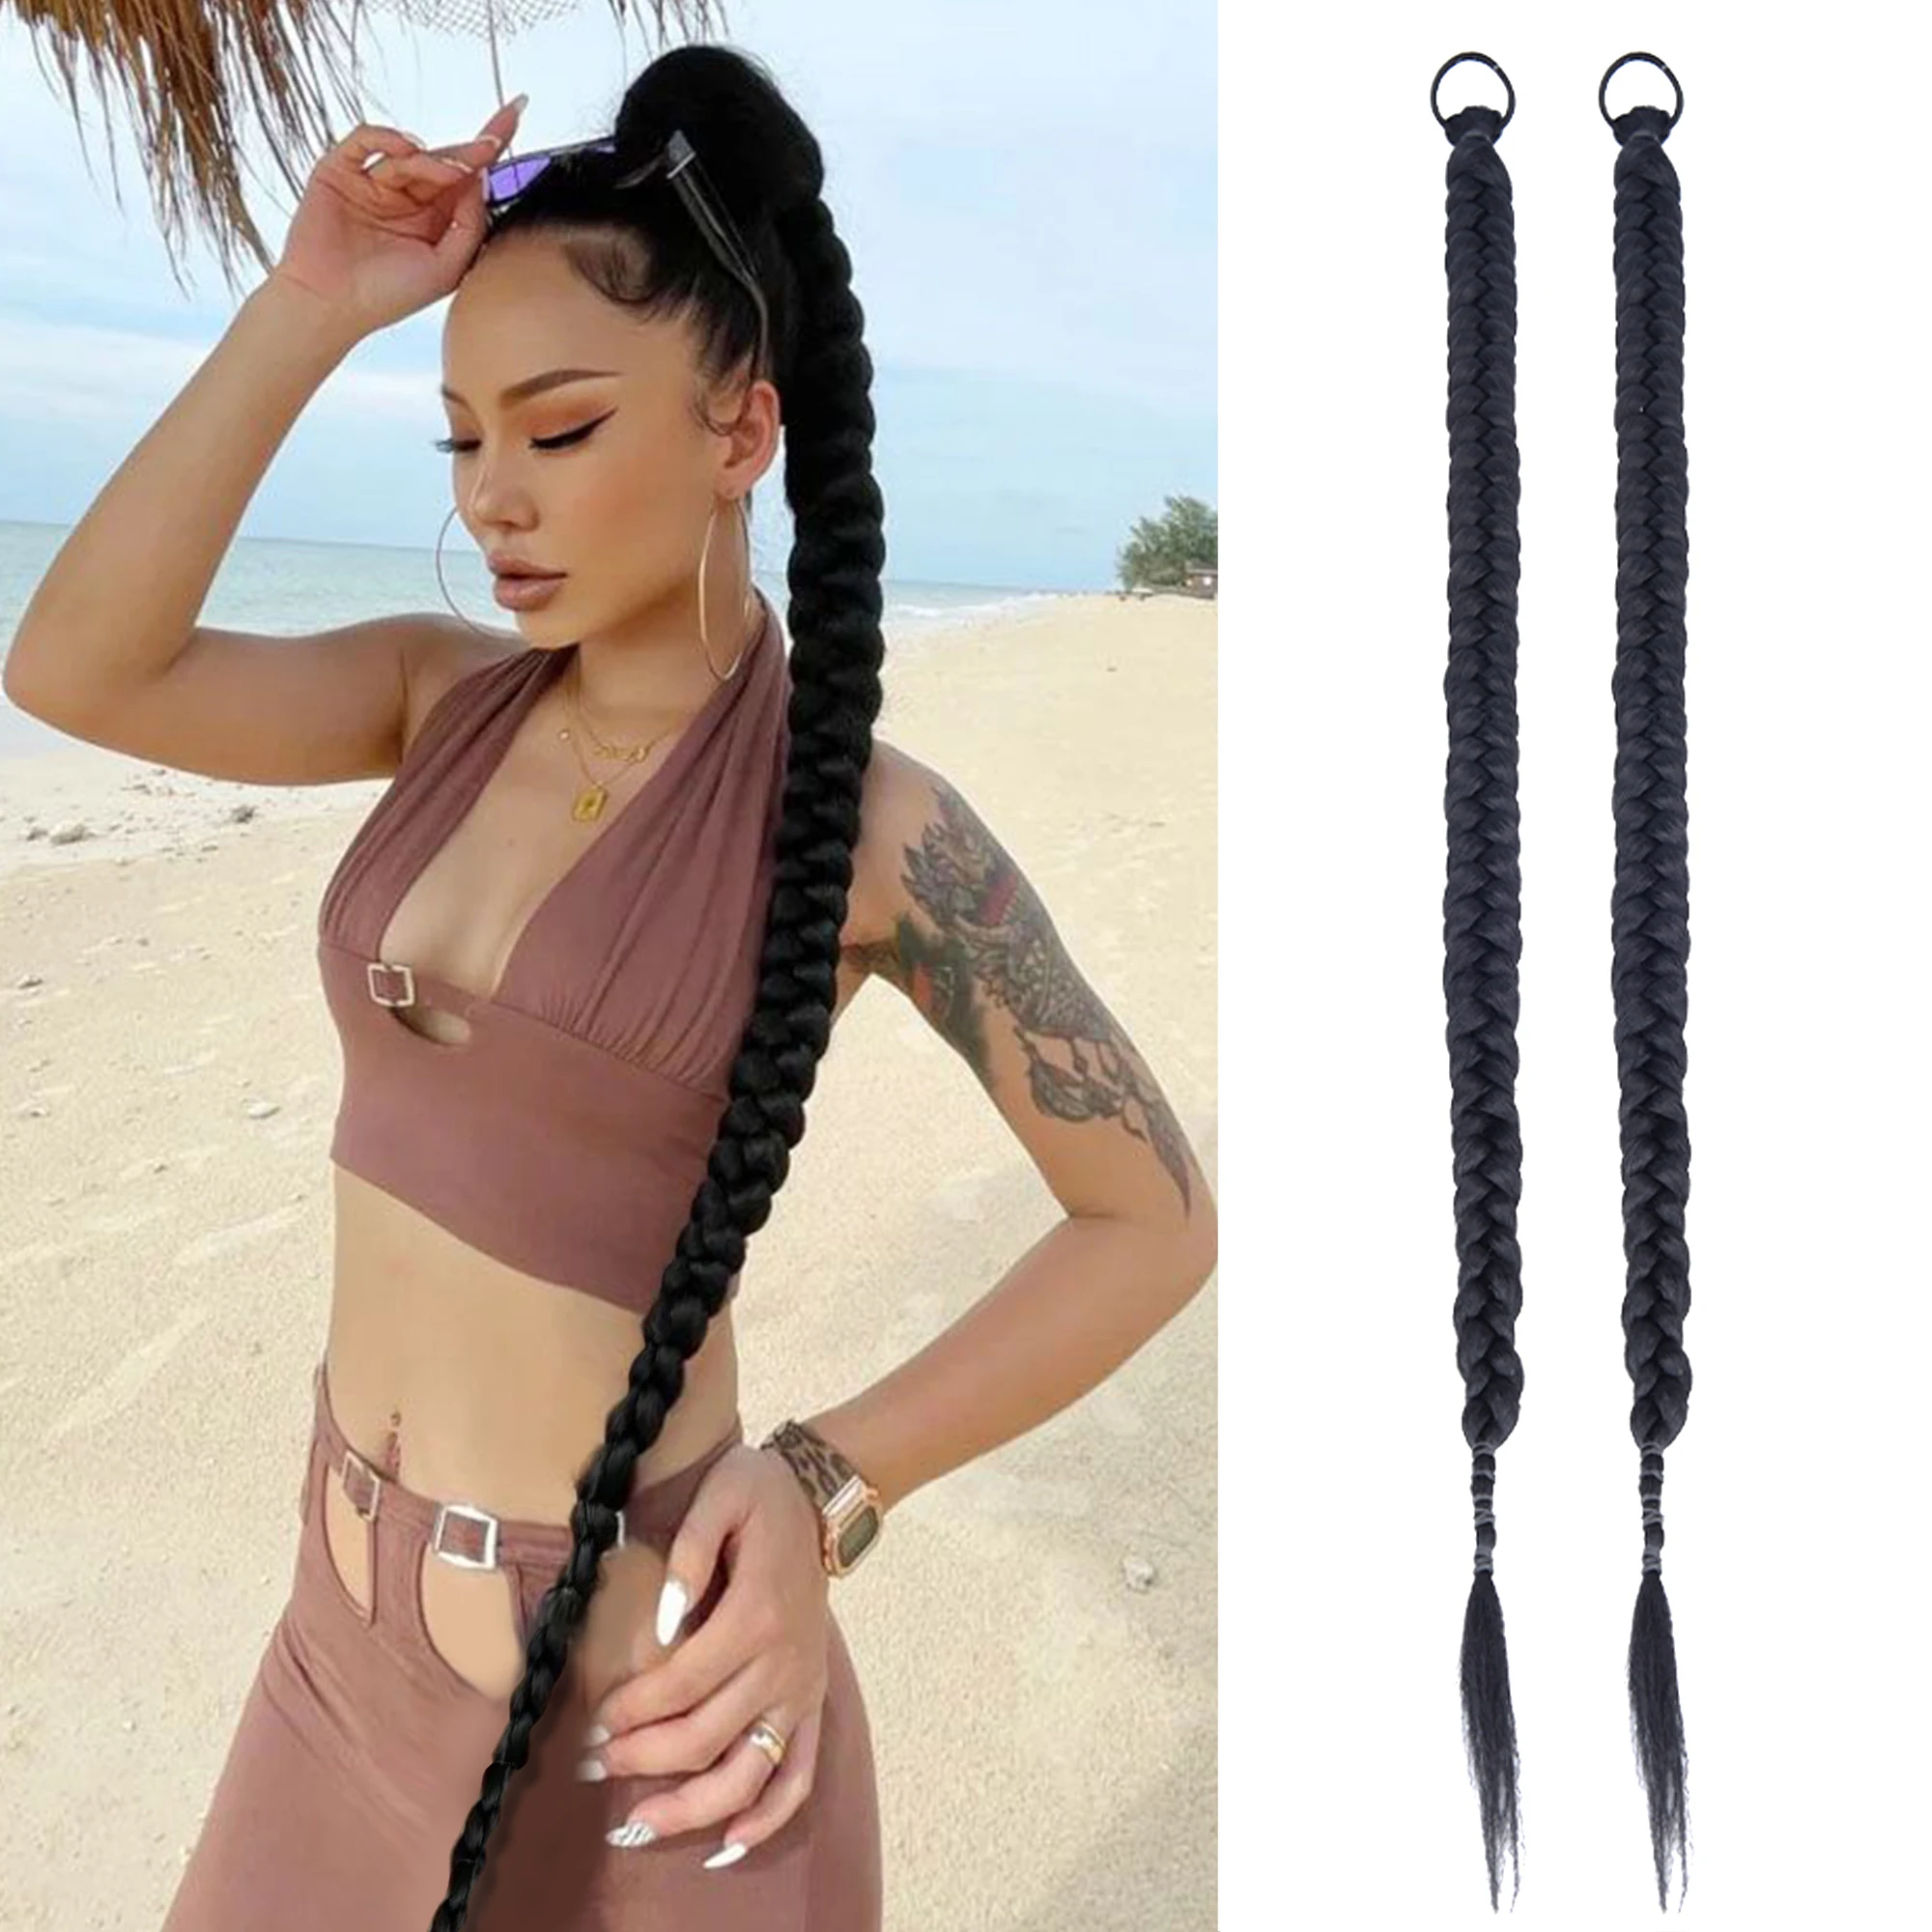 

LVHAN Synthetic Ponytail Long Hair Braided Braid Hair Extension Black Ponytail Wig Twist Braid Boxing Suitable For Black People